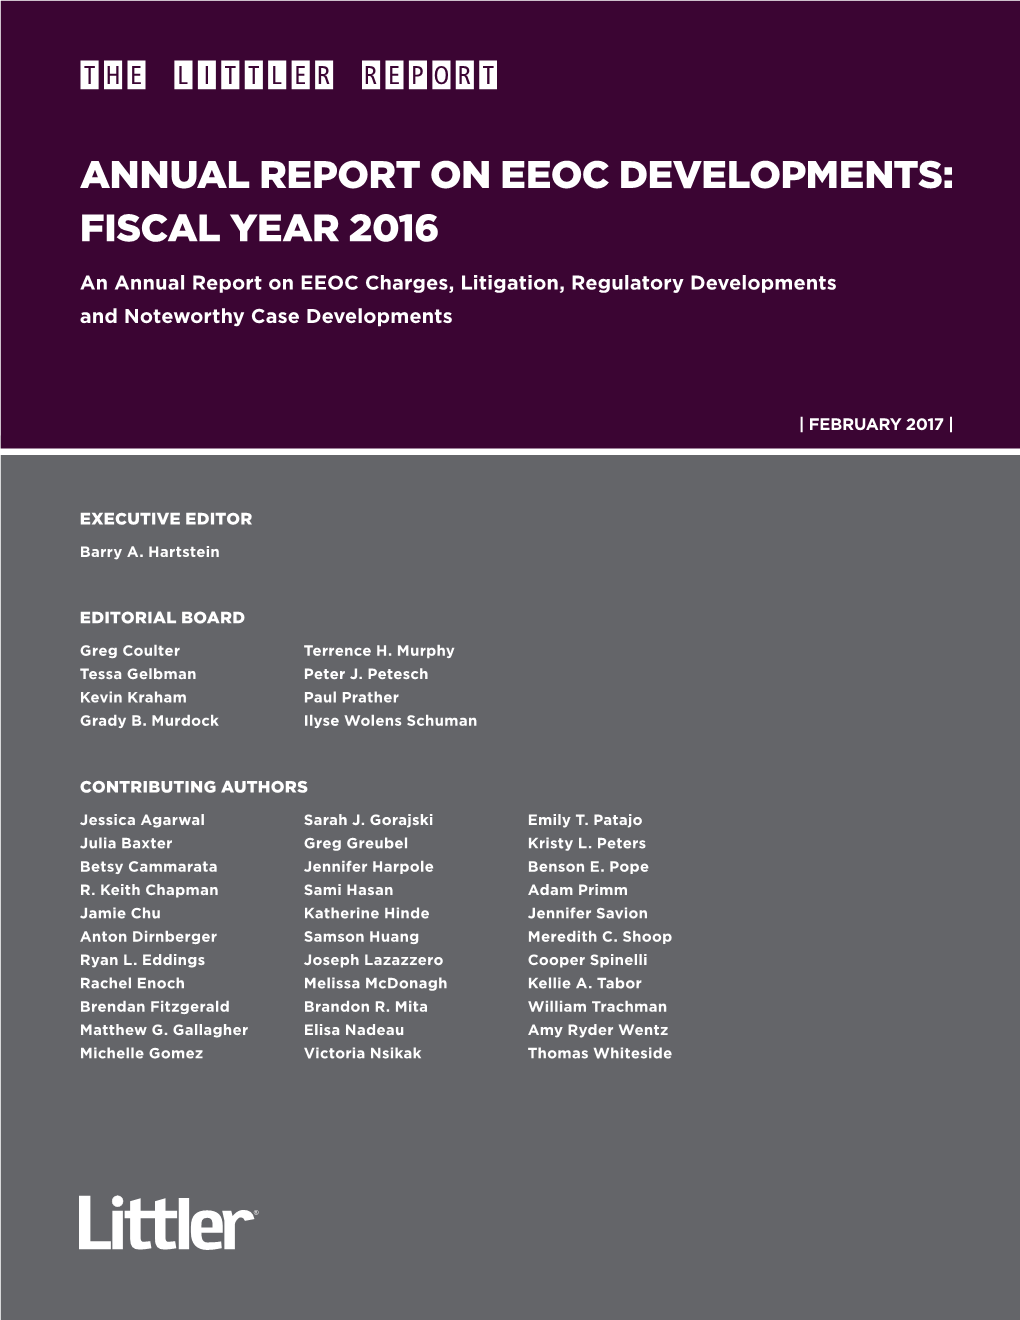 Annual Report on Eeoc Developments: Fiscal Year 2016